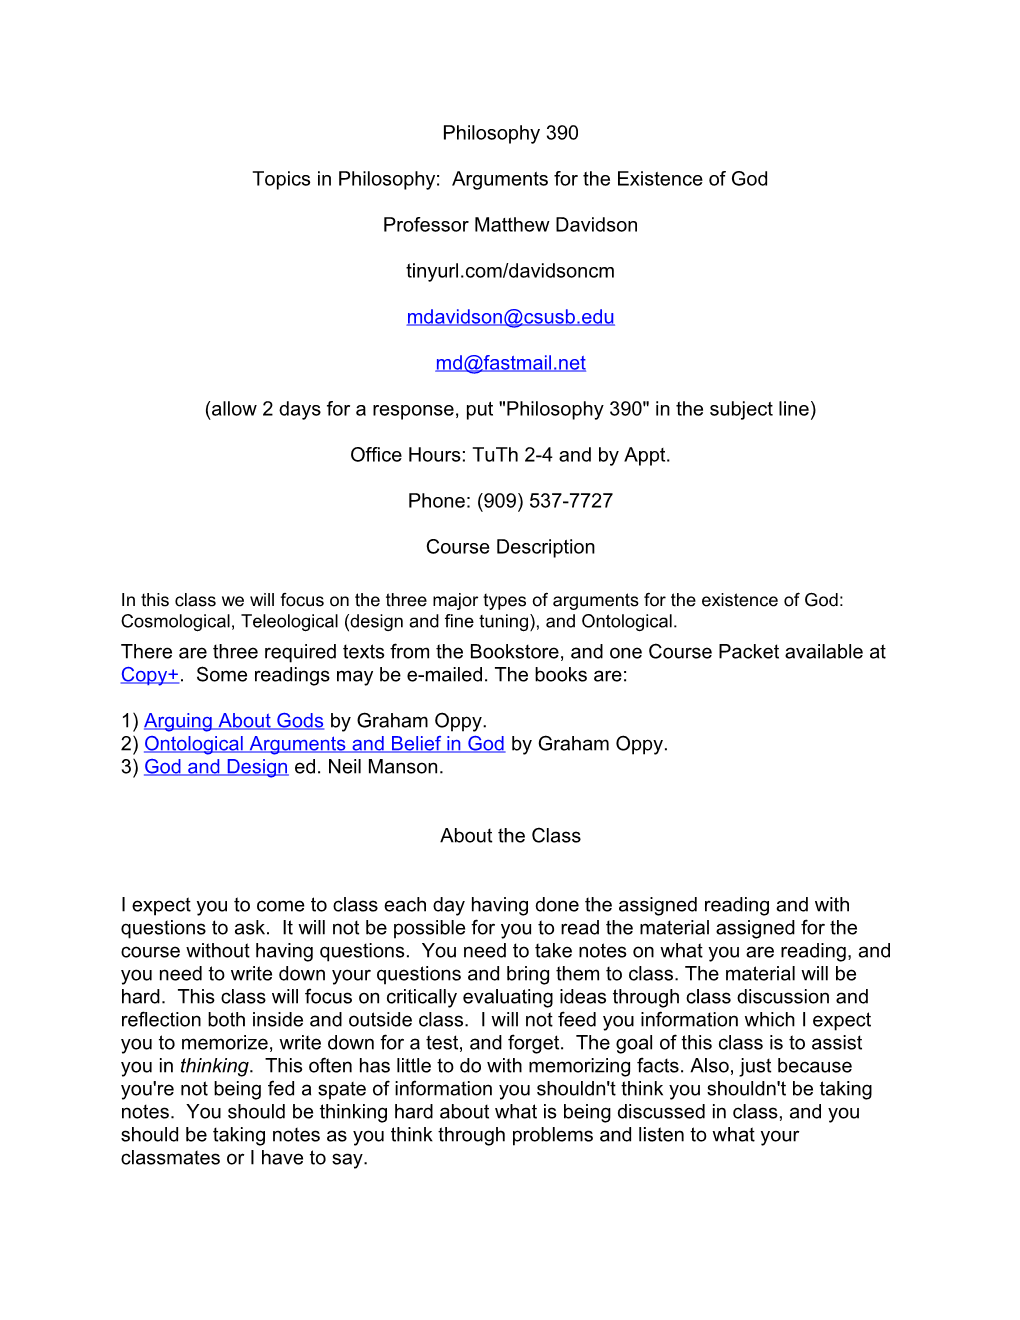 Topics in Philosophy: Arguments for the Existence of God